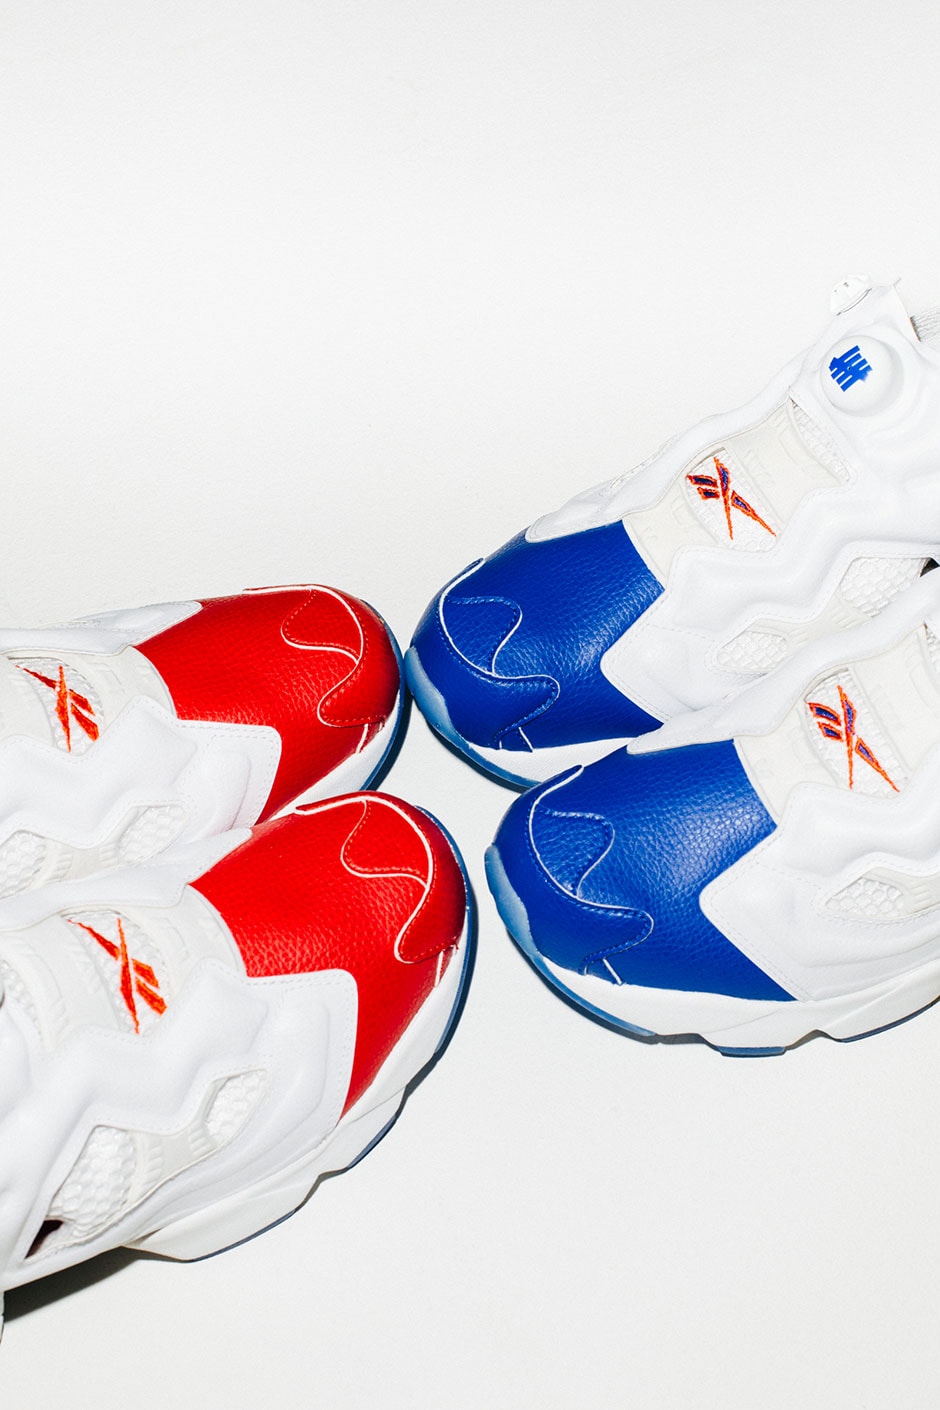 UNDEFEATED Reebok Instapump Fury Allen Iverson Question Collaboration